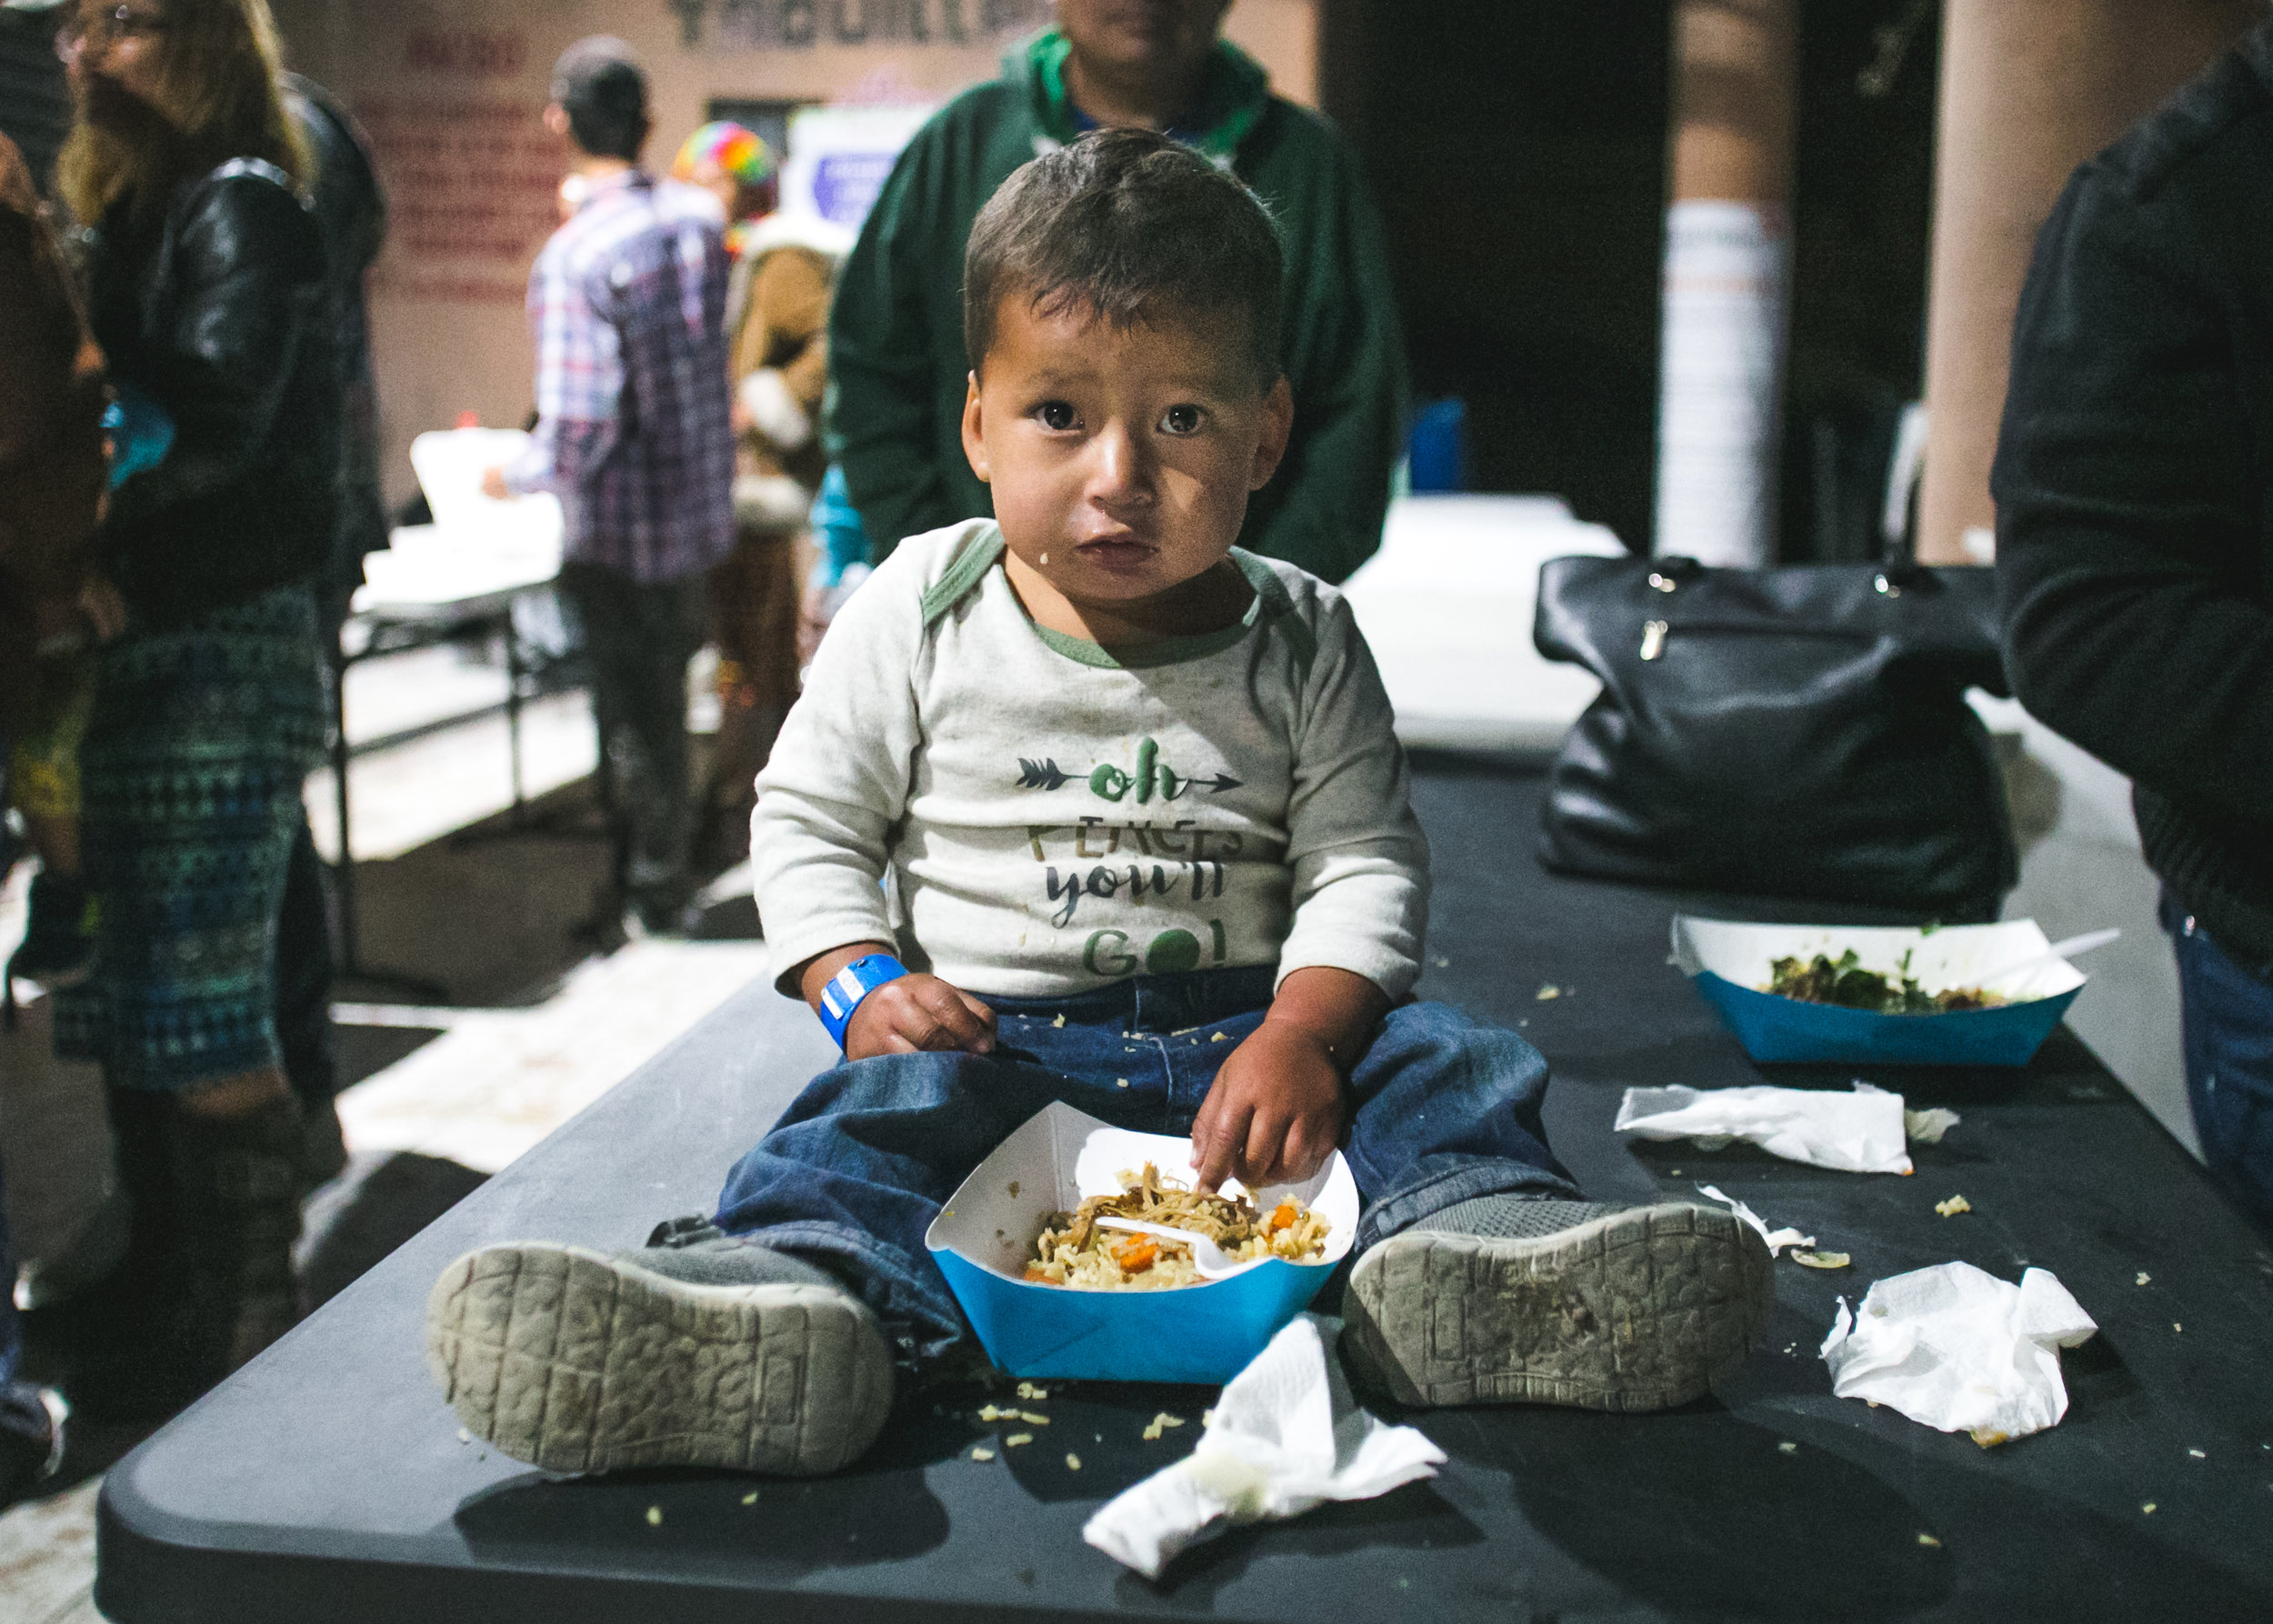  David Zuniga, 2, of Honduras, sits on a dinner table in the Barretal migrant camp located 20 minutes outside of Tijuana. Three meals a day are provided by local volunteers, churches, or international non-profits. David is covered by a dinner served 